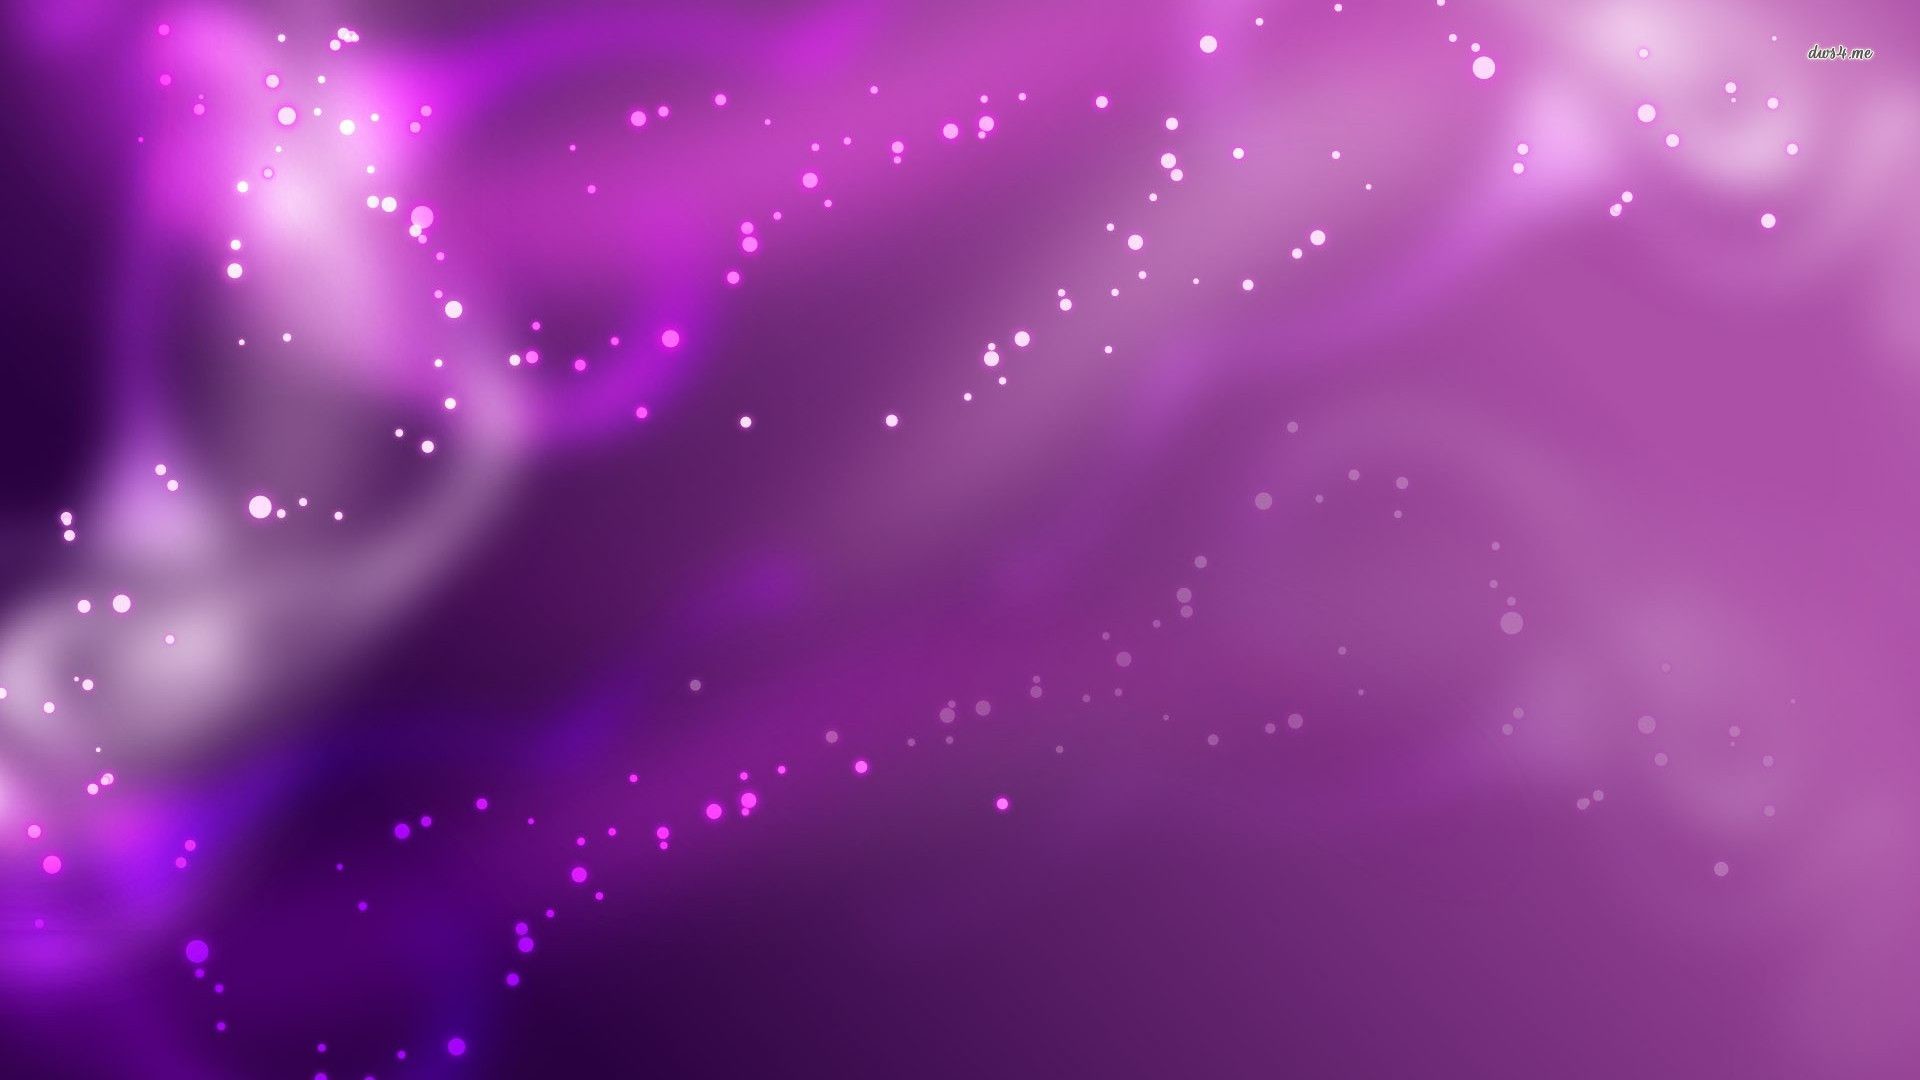 1920x1080 Abstract Star In Blue And Lilac ctor Background For